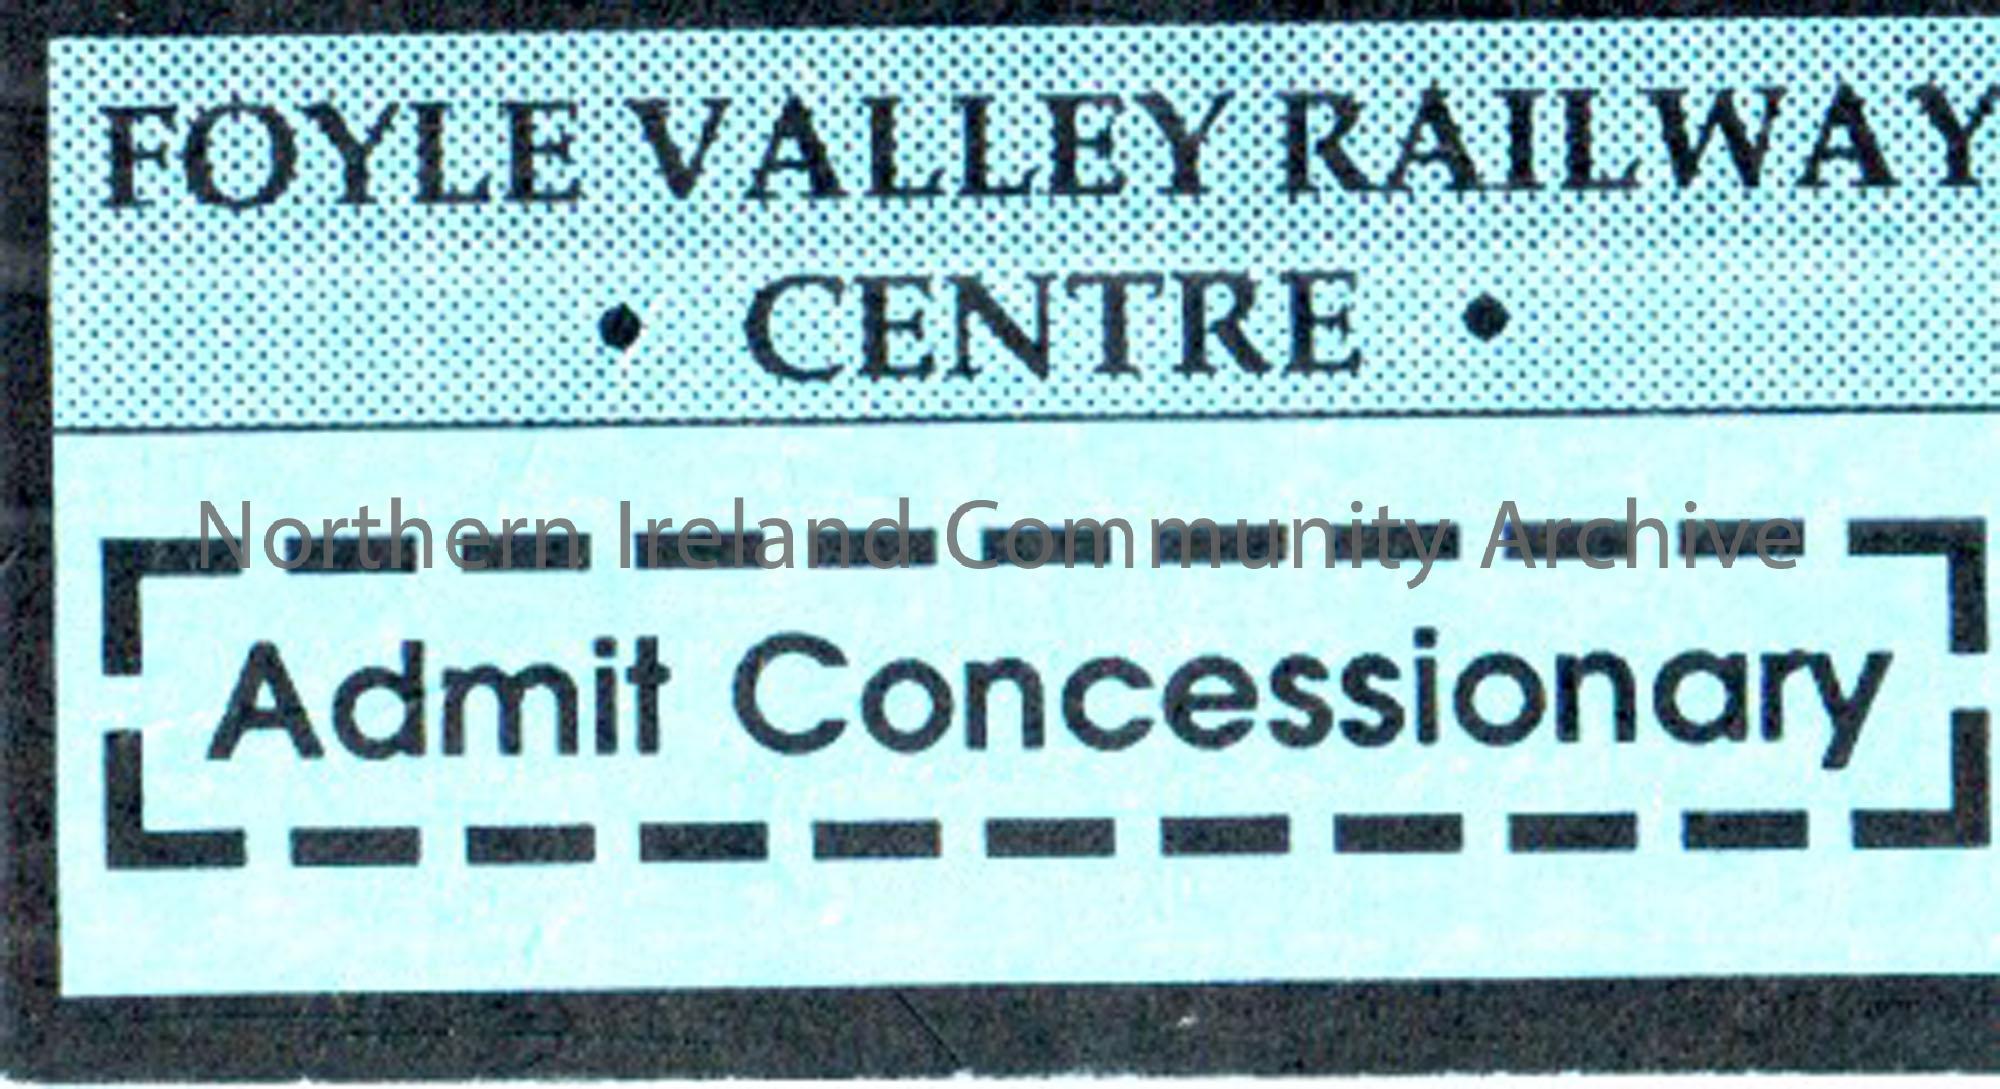 Foyle Valley Railway Centre, Admit Concessionary